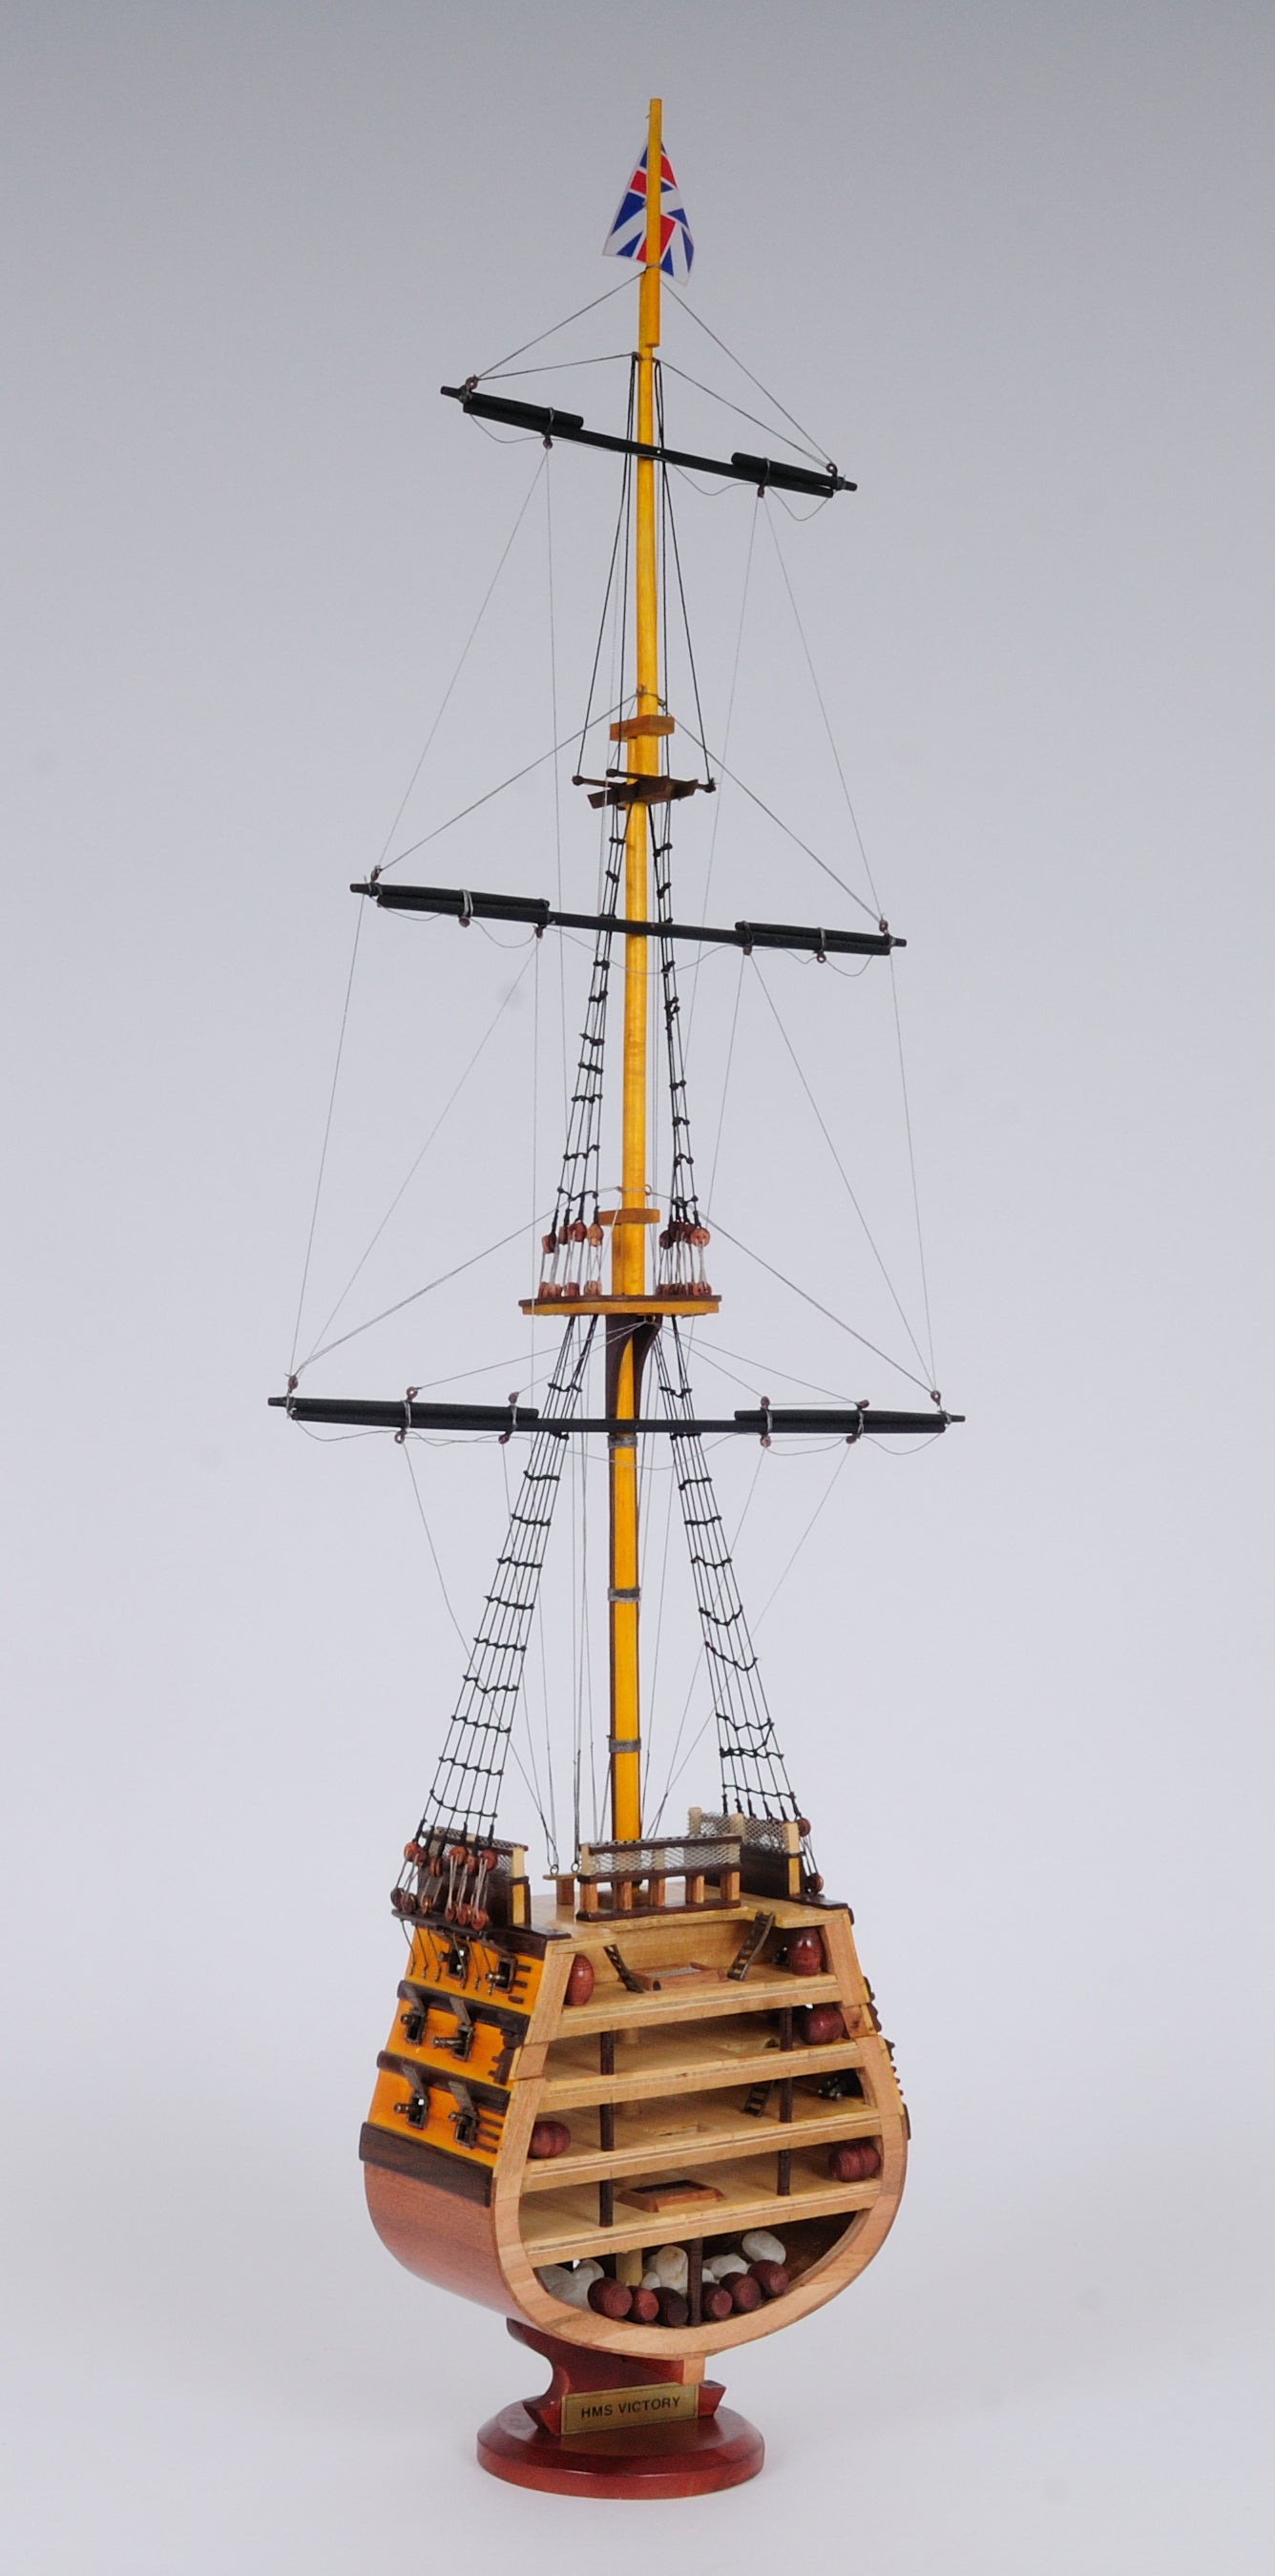 Aldo Hobbies & Creative Arts> Collectibles> Scale Model new / Wood / L: 12.25 W: 4 H: 35.25 Inches HMS Victory British Fighting Vessel Admiral Horatio Nelson’s flagship Tallship Cross Section Excusive Wood Model Sailboat Assembled